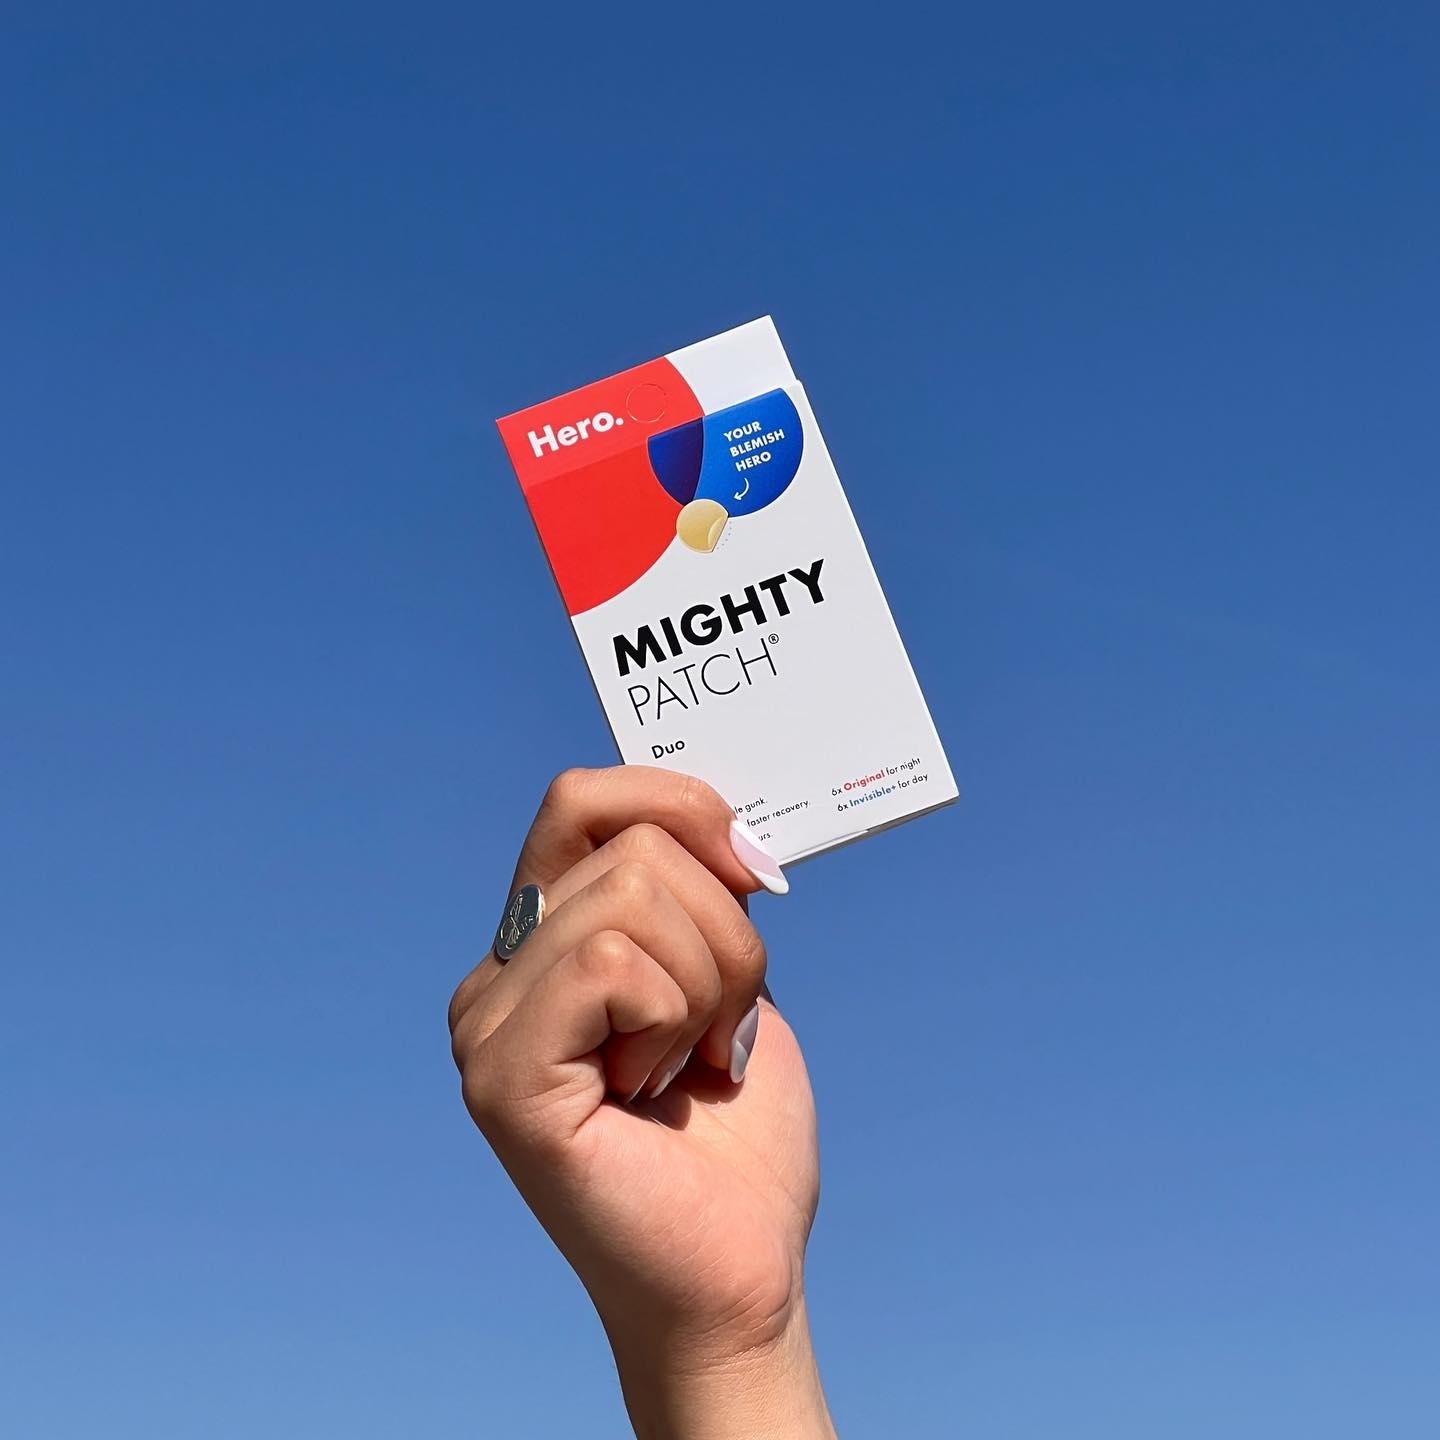 Model holding the patches against a clear sky